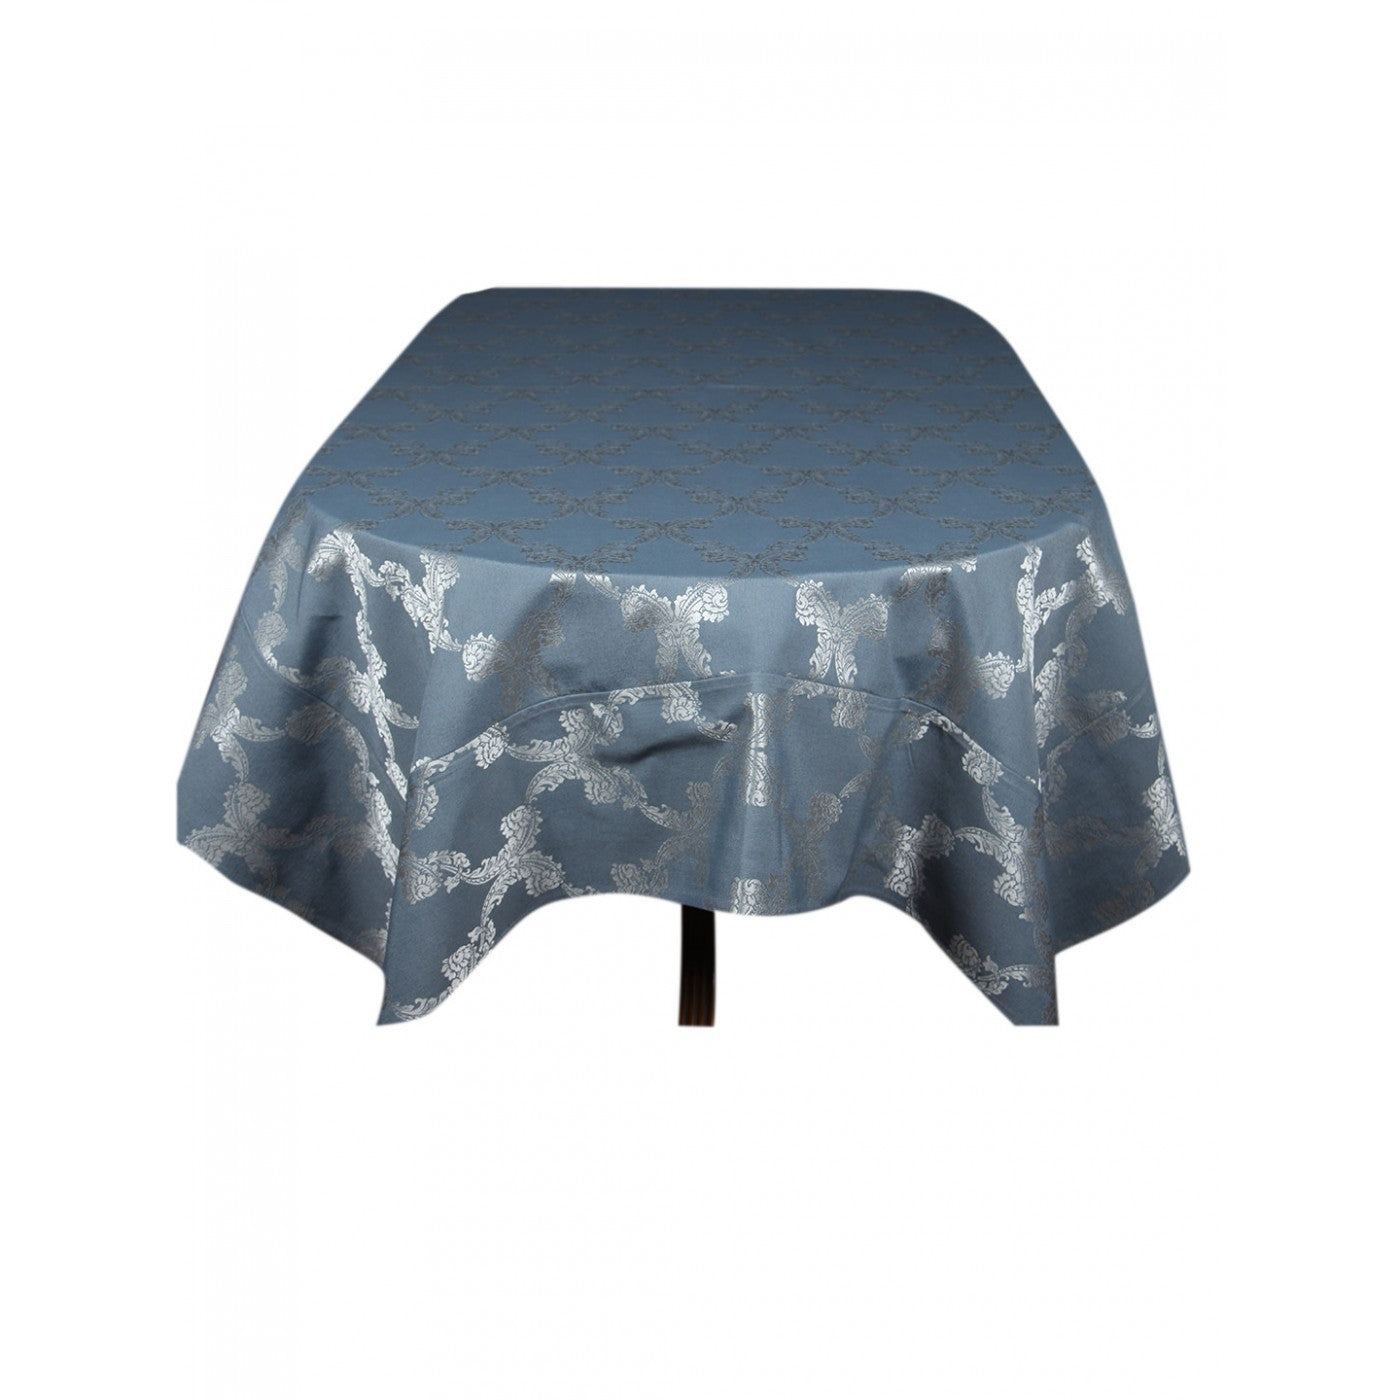 Opulent Ogee Jacquard Elegance for Your Dining Table Cover